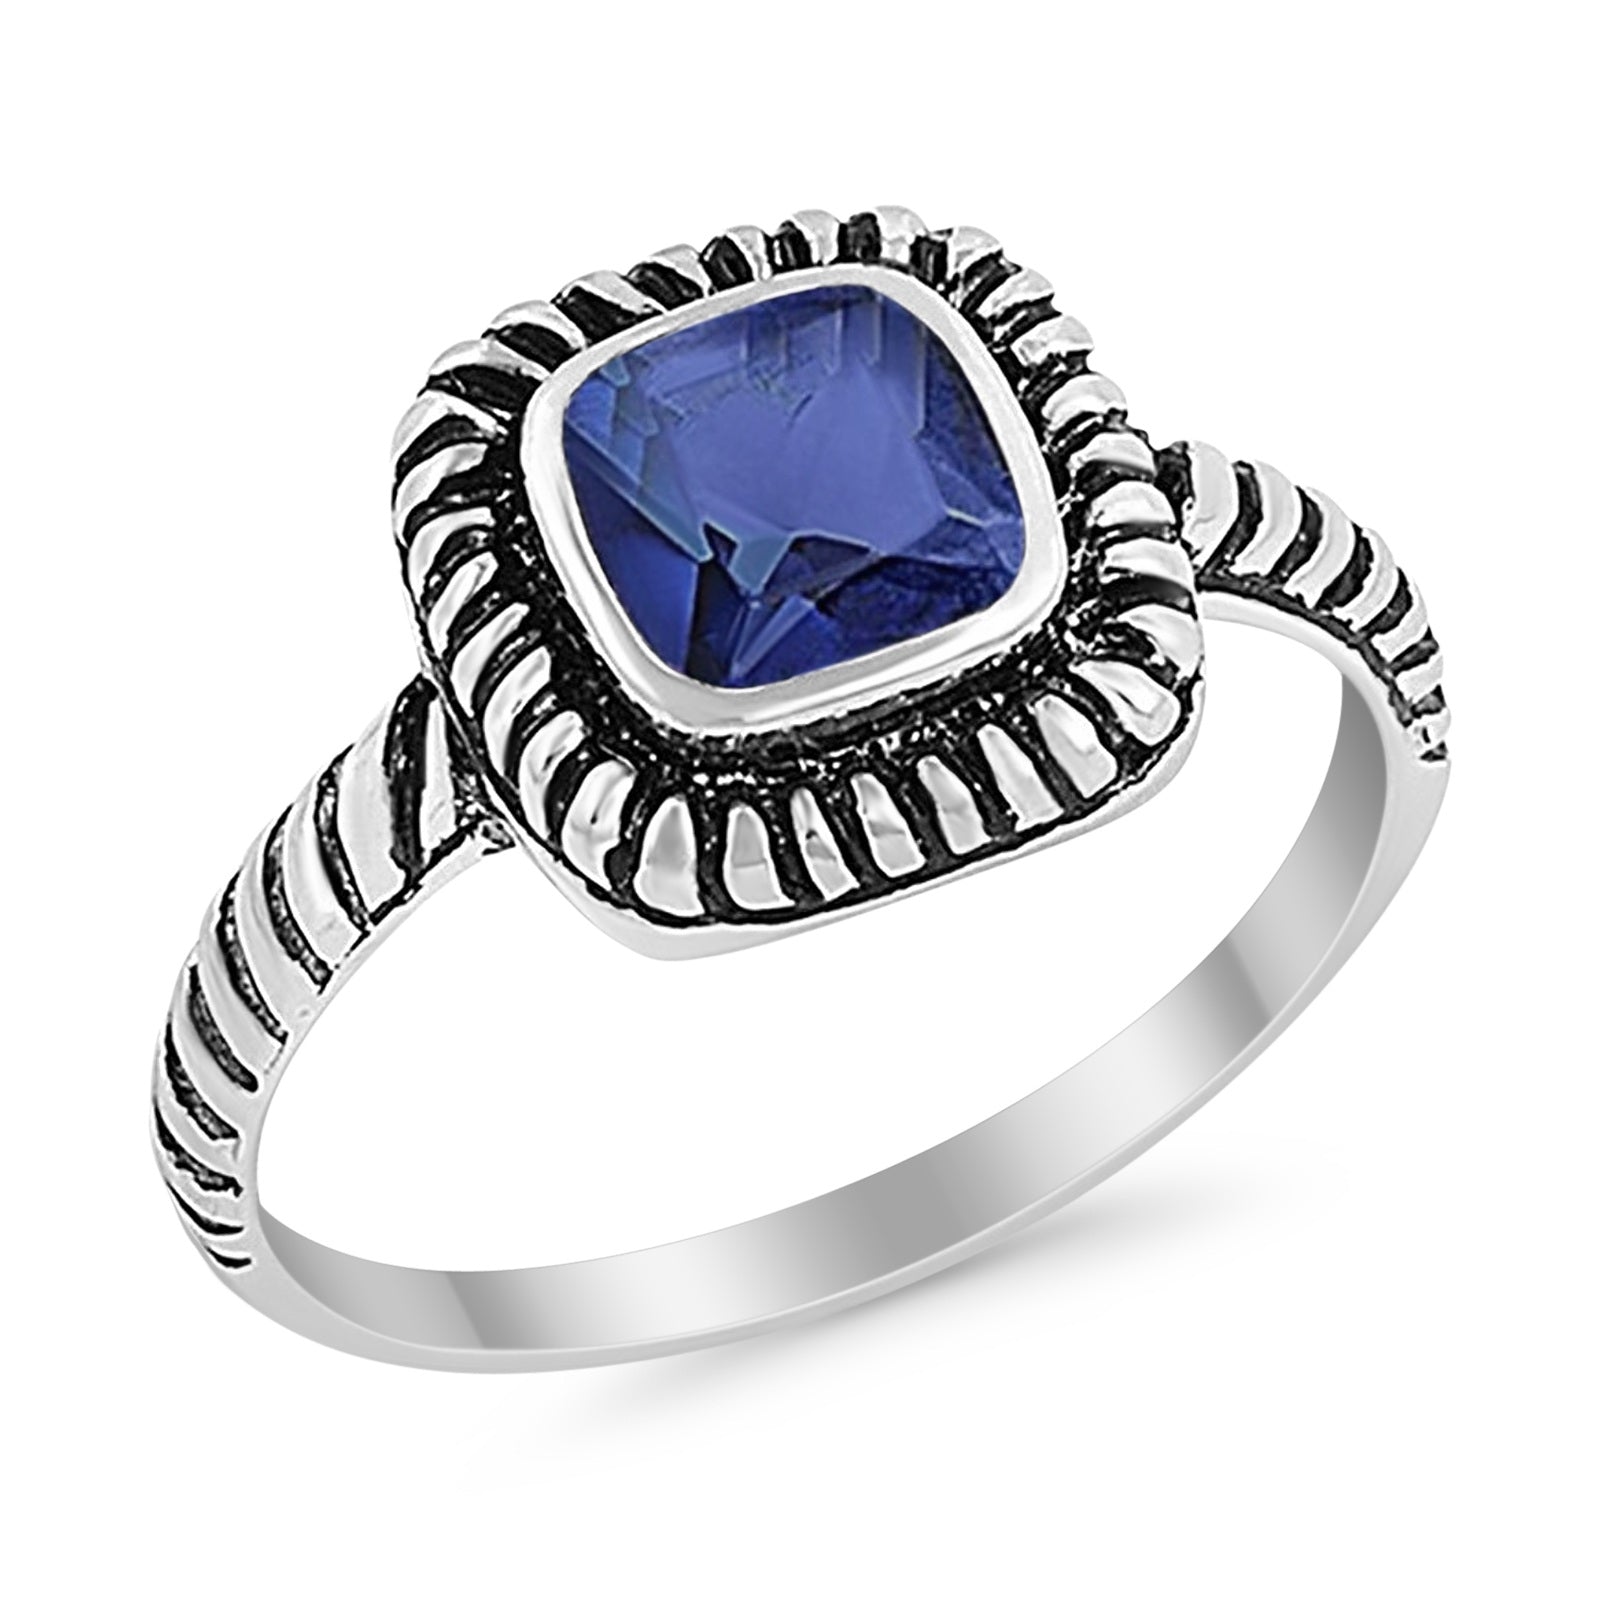 Princess Cut Simulated Blue Sapphire Cubic Zirconia Oxidized Design Ring 925 Sterling Silver